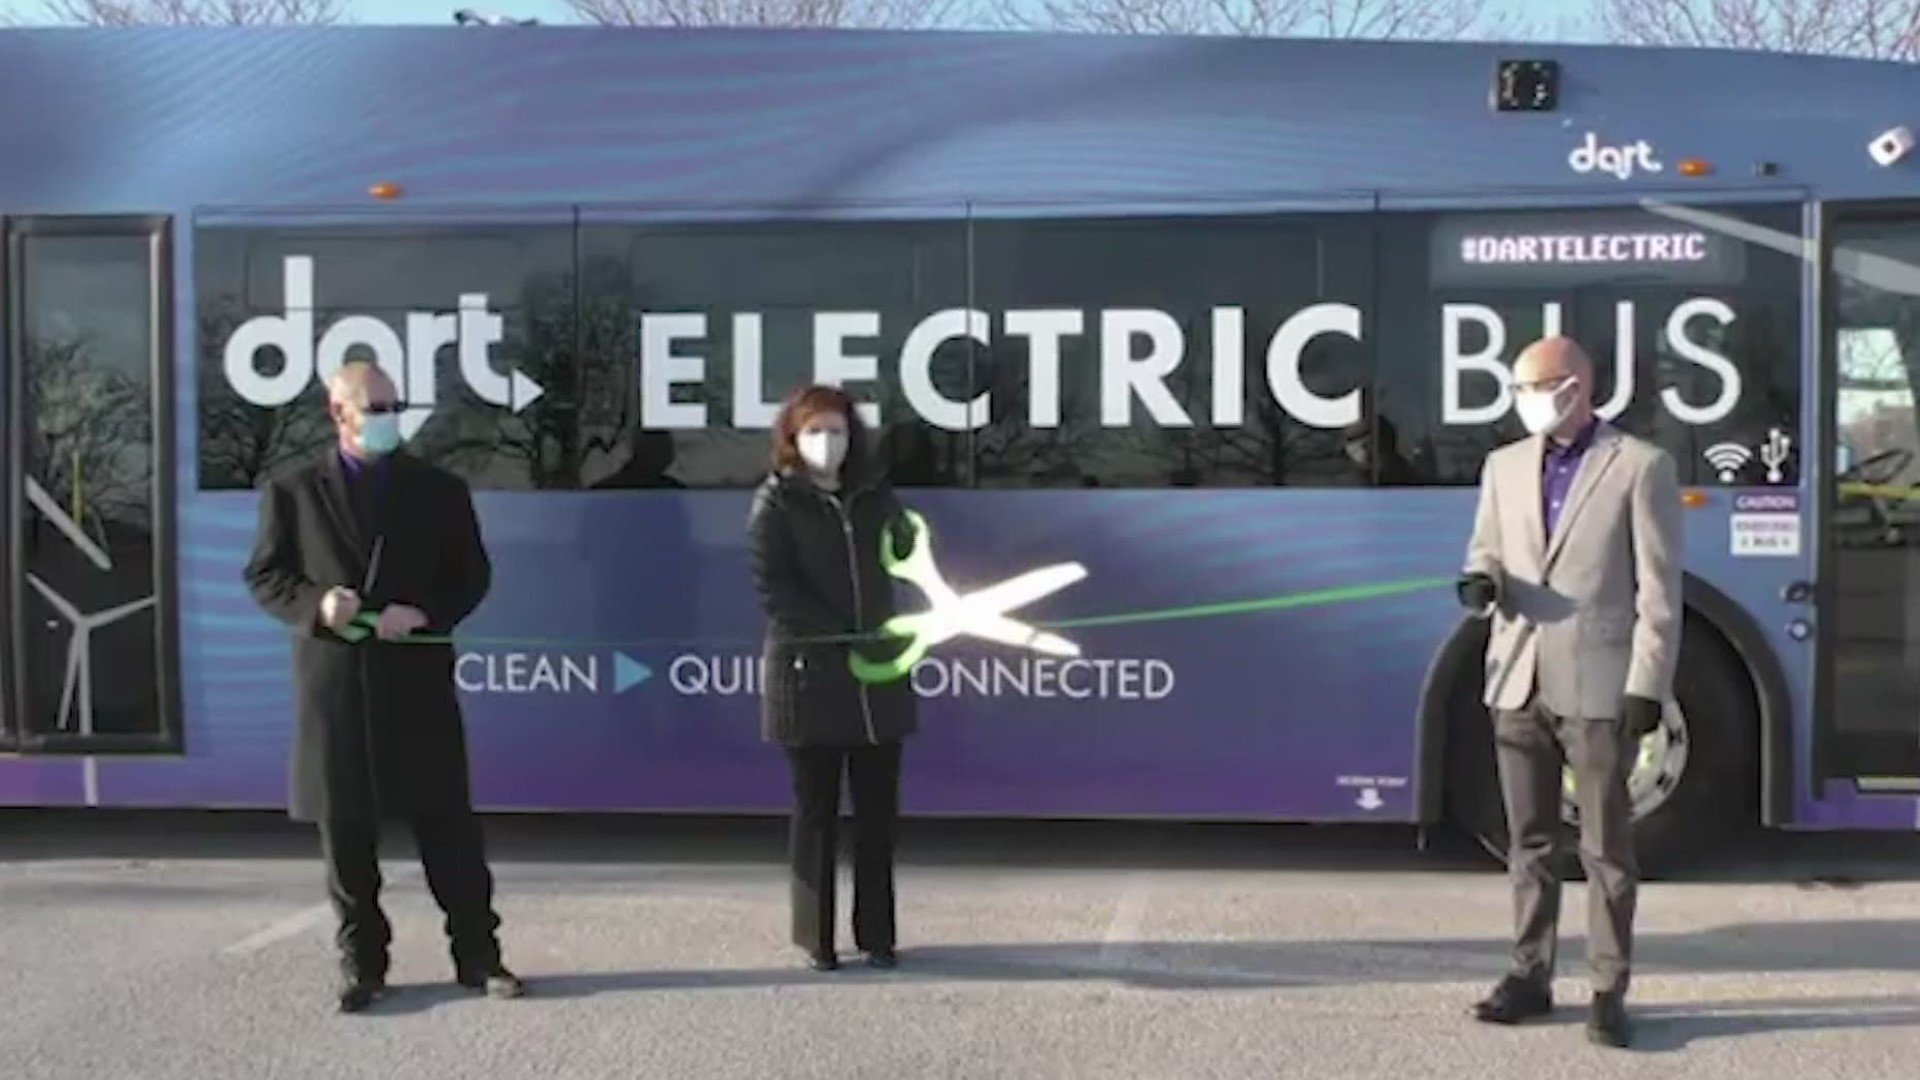 Seven electric buses are cruising the streets of Des Moines.